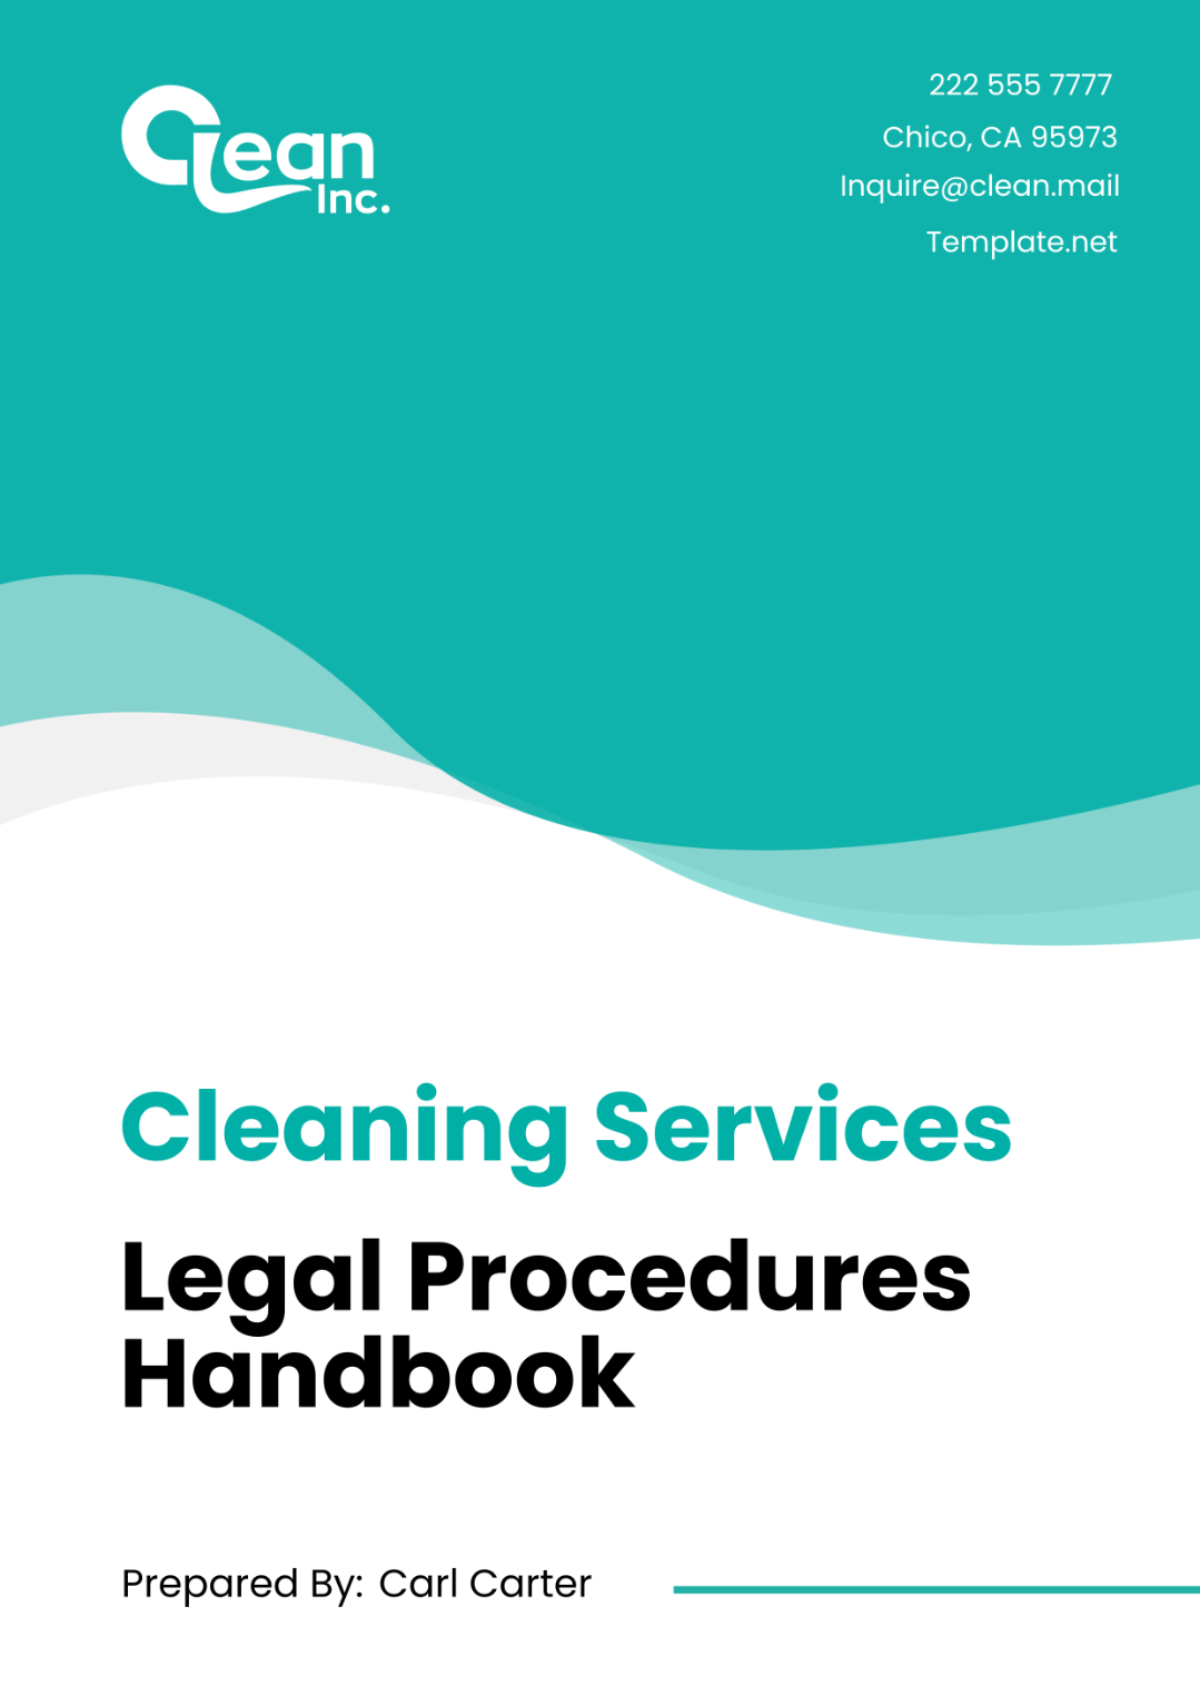 Cleaning Services Legal Procedures Handbook Template